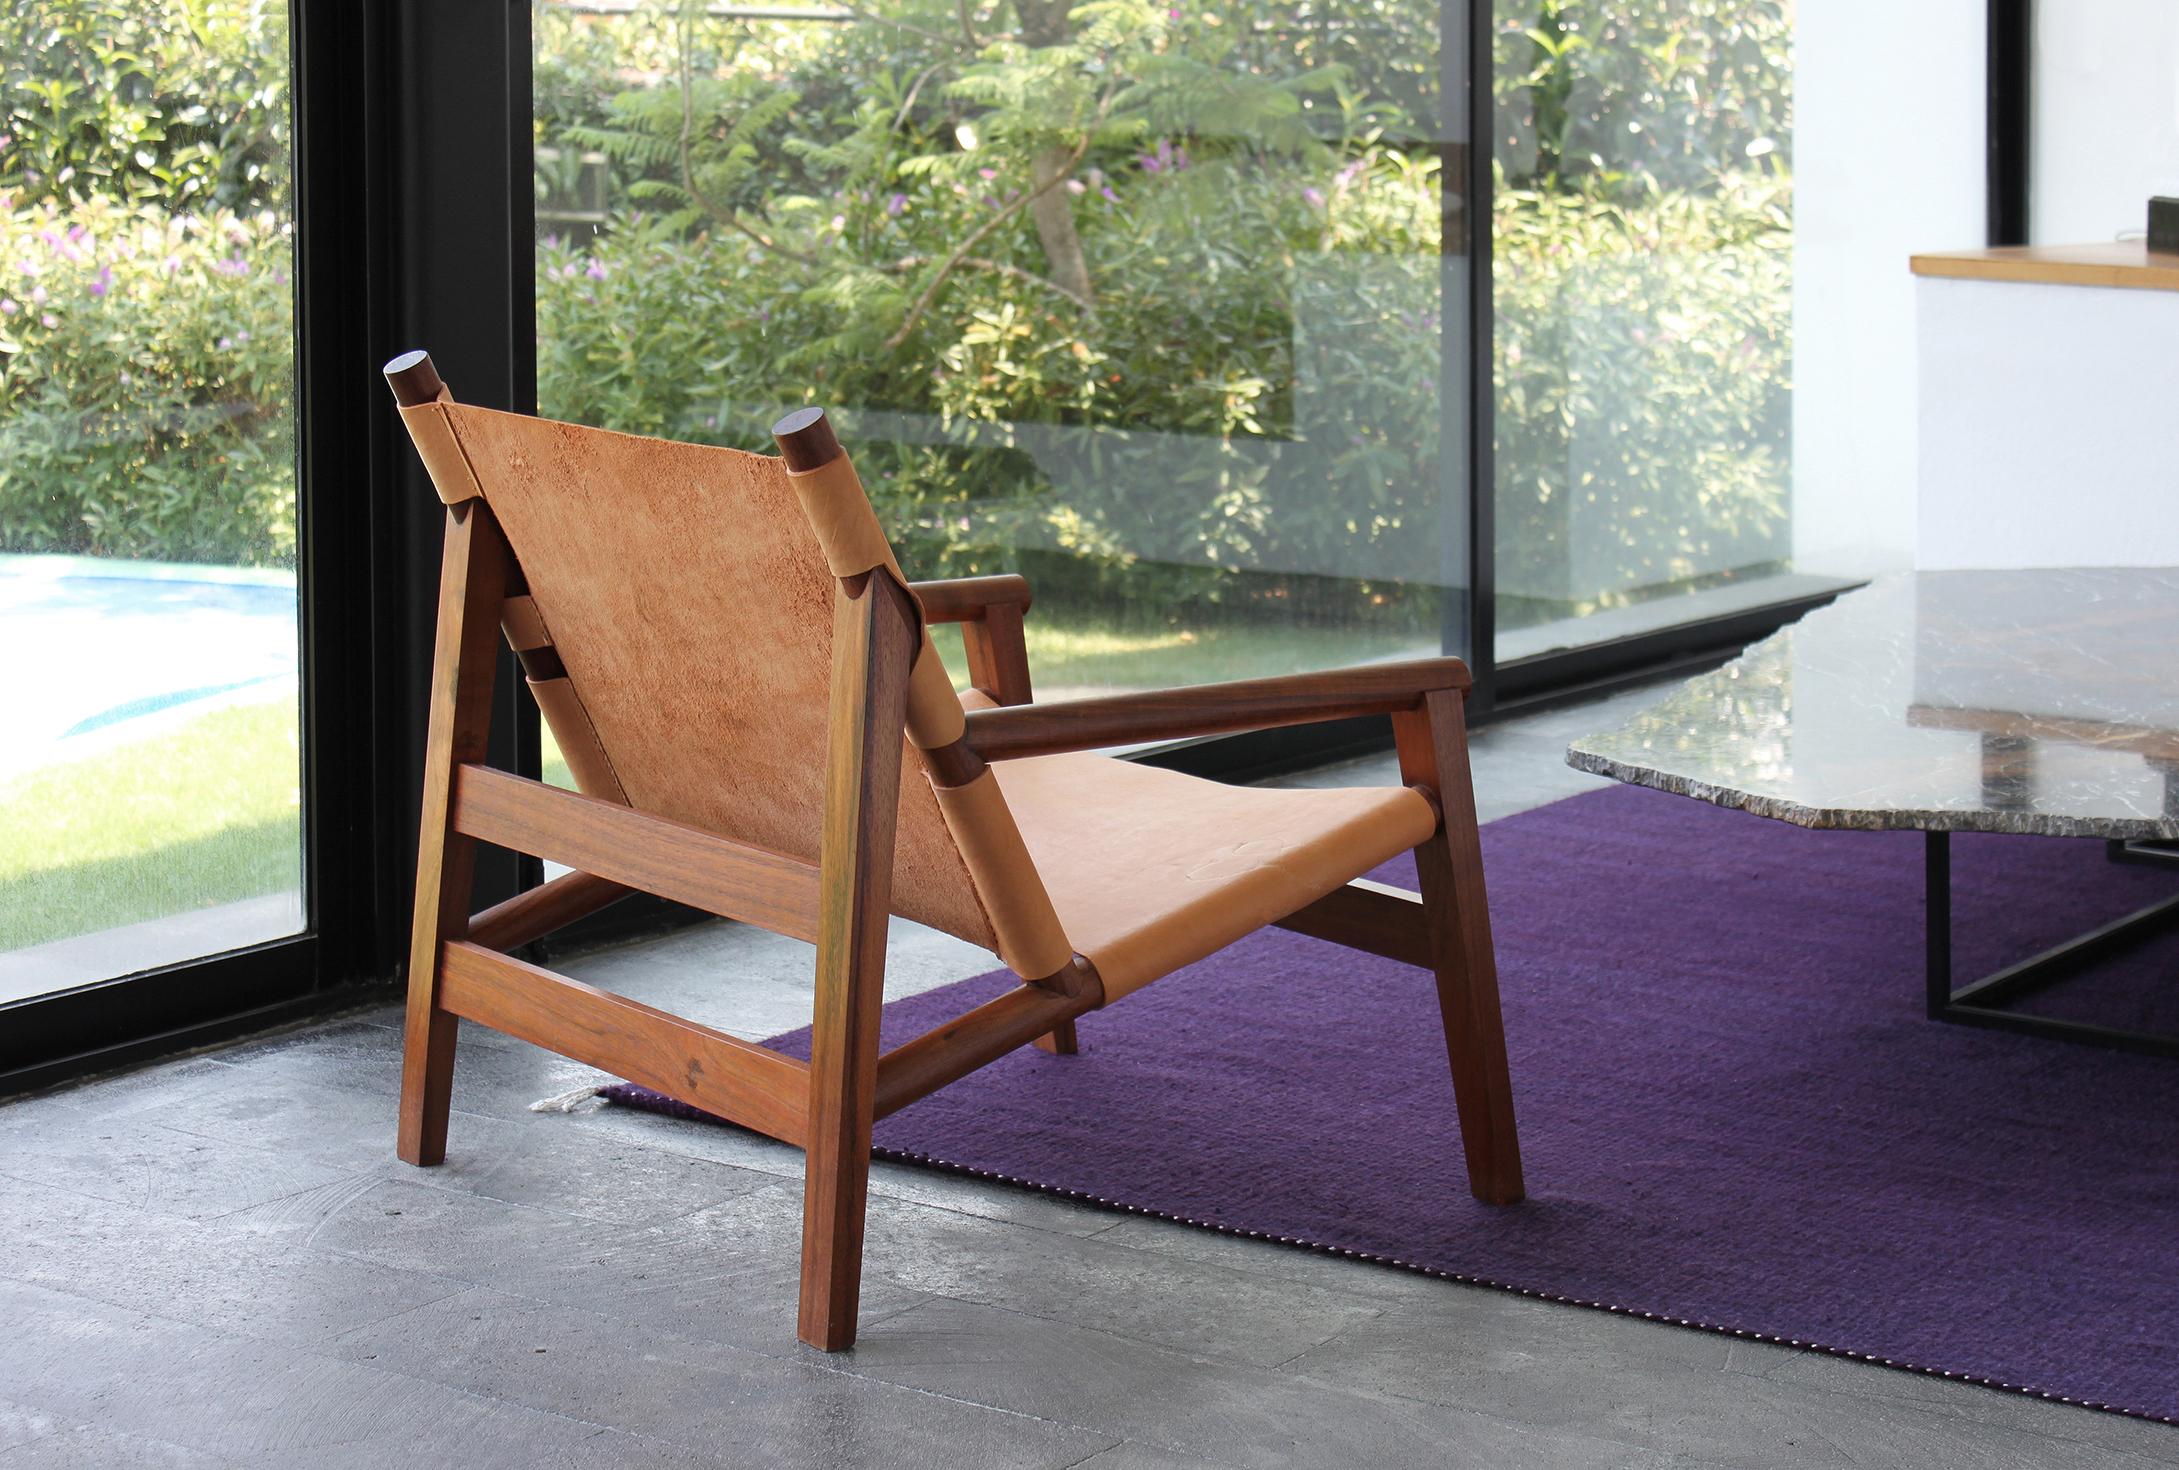 La Colima Chair, Maria Beckmann, Represented by Tuleste Factory 14